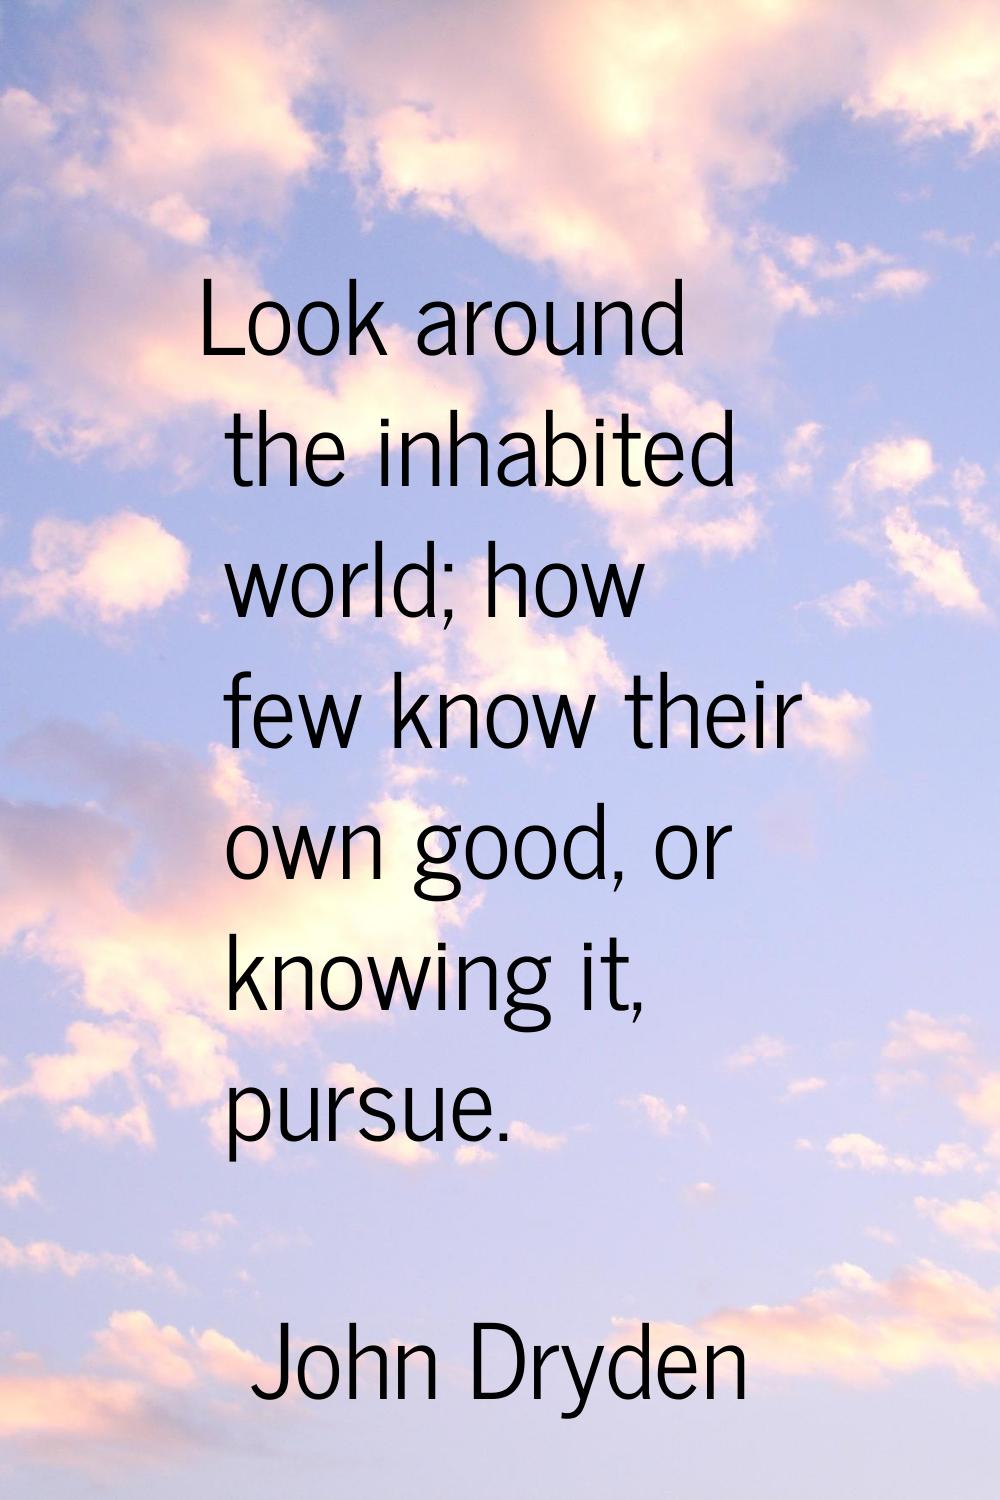 Look around the inhabited world; how few know their own good, or knowing it, pursue.